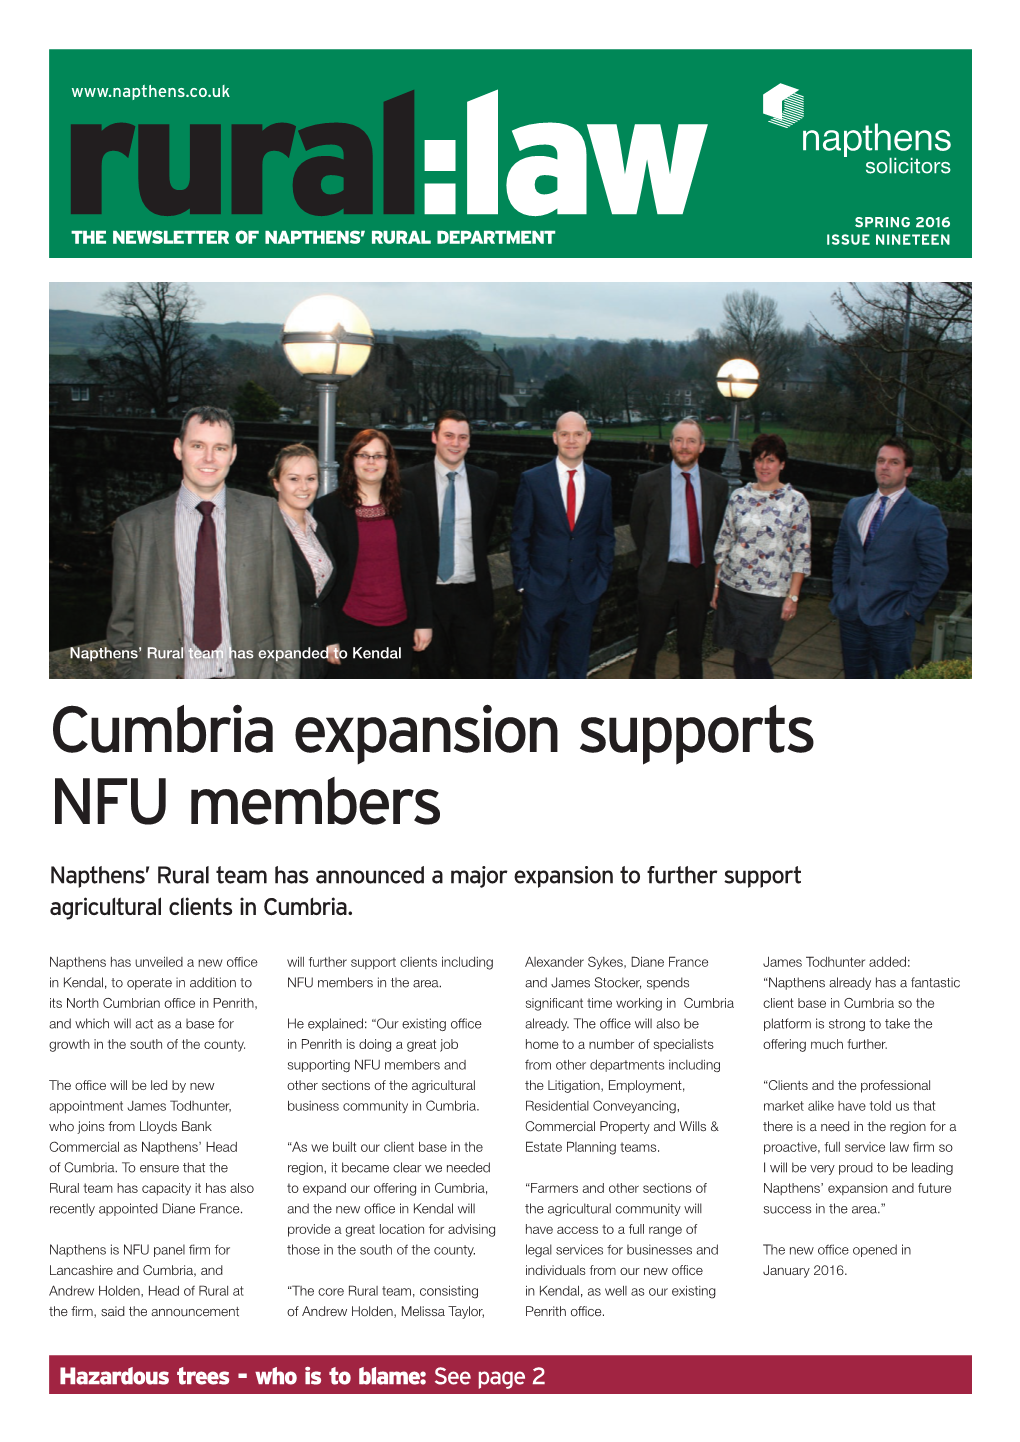 Cumbria Expansion Supports NFU Members